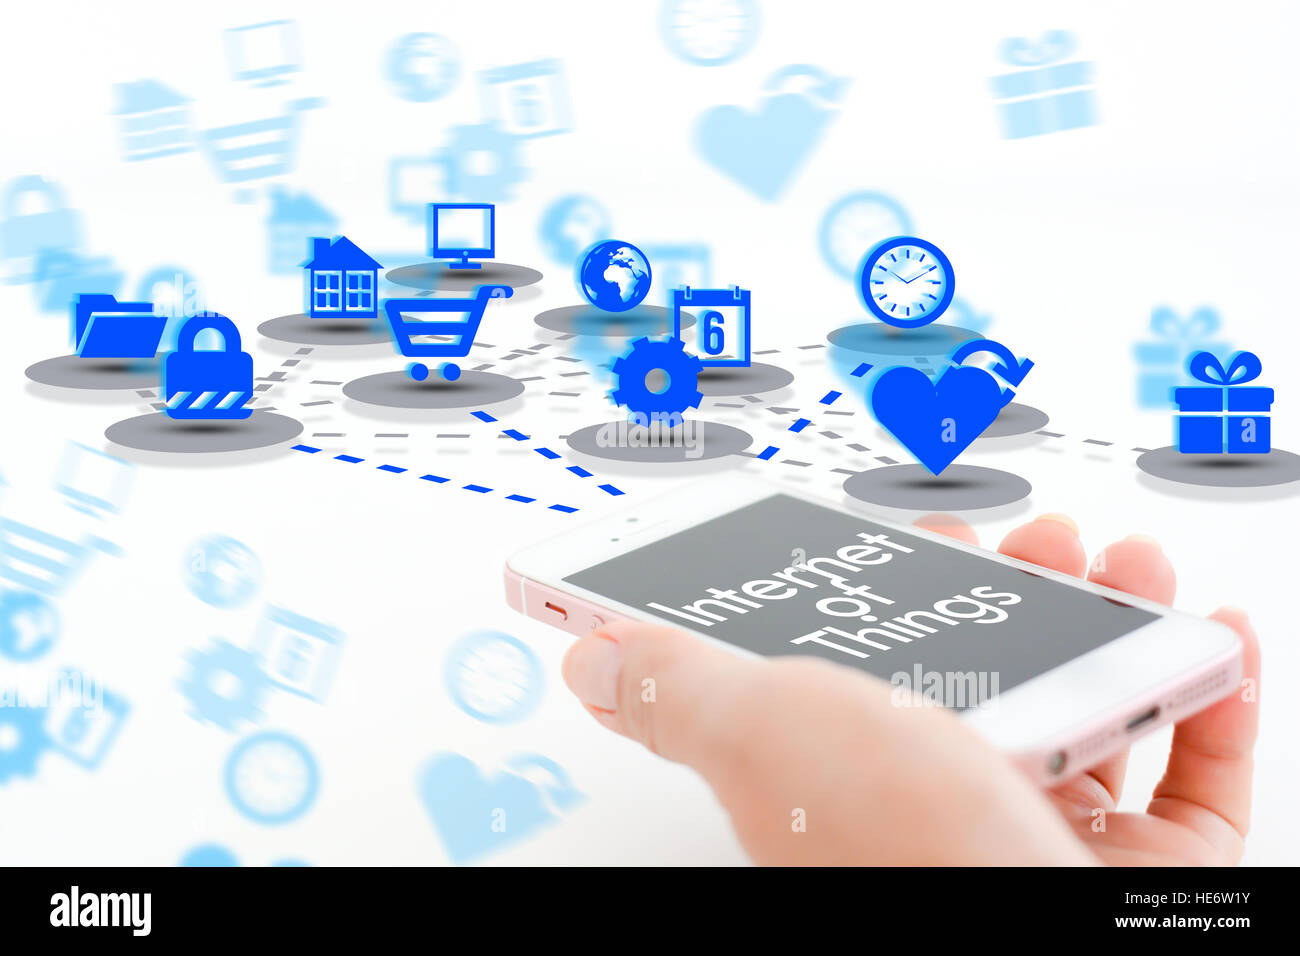 Internet of things concept with smartphone and different apps icons Stock Photo